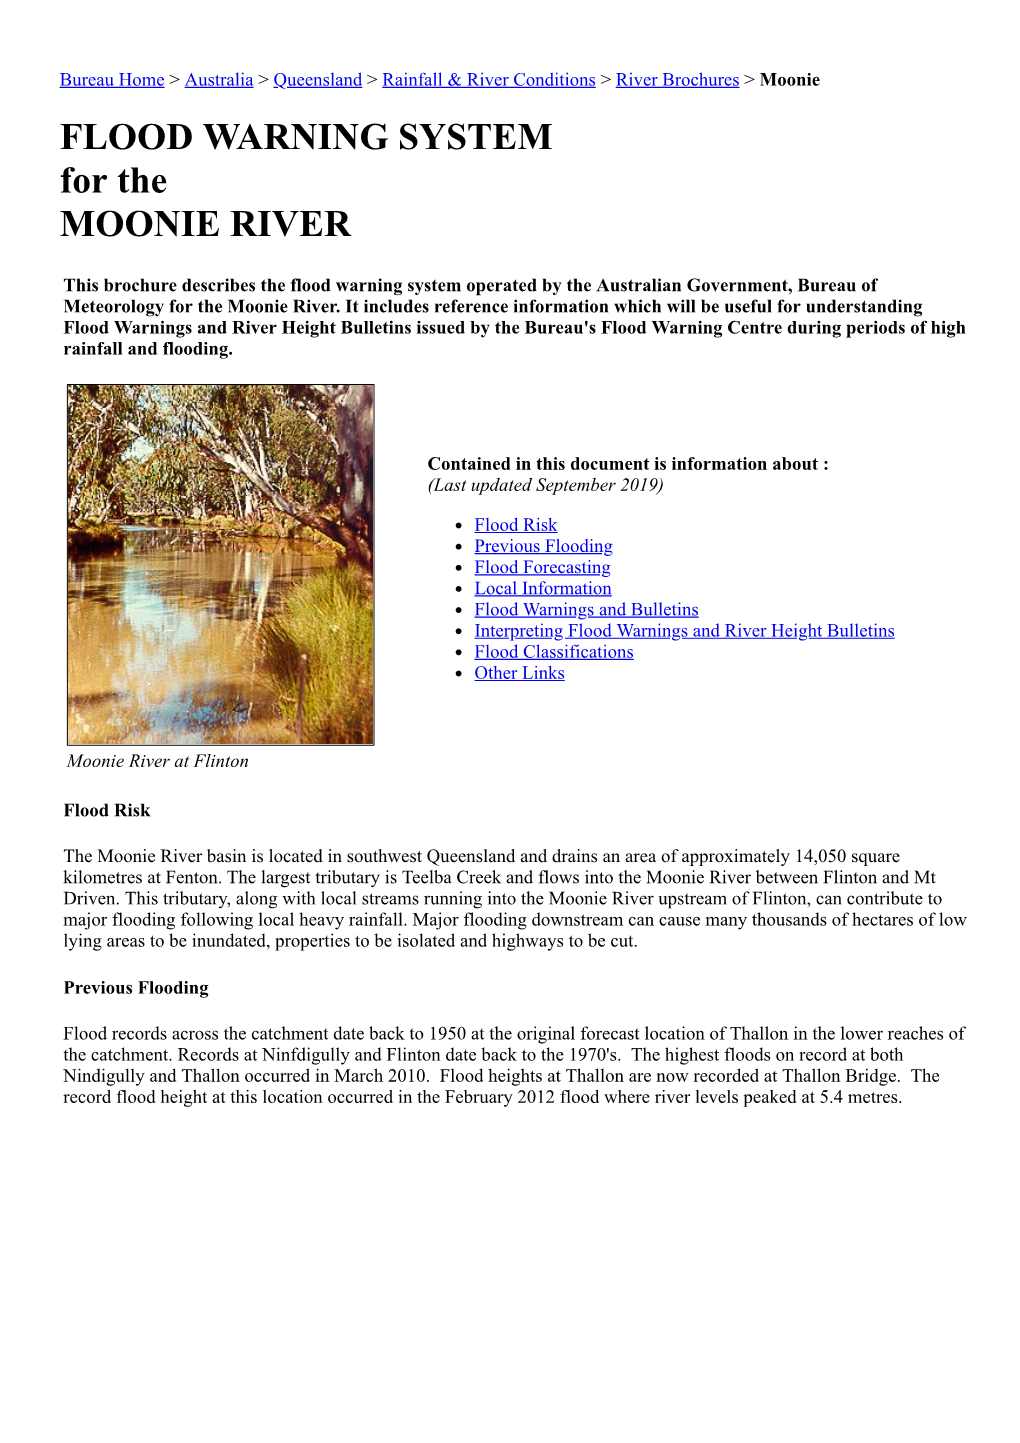 FLOOD WARNING SYSTEM for the MOONIE RIVER